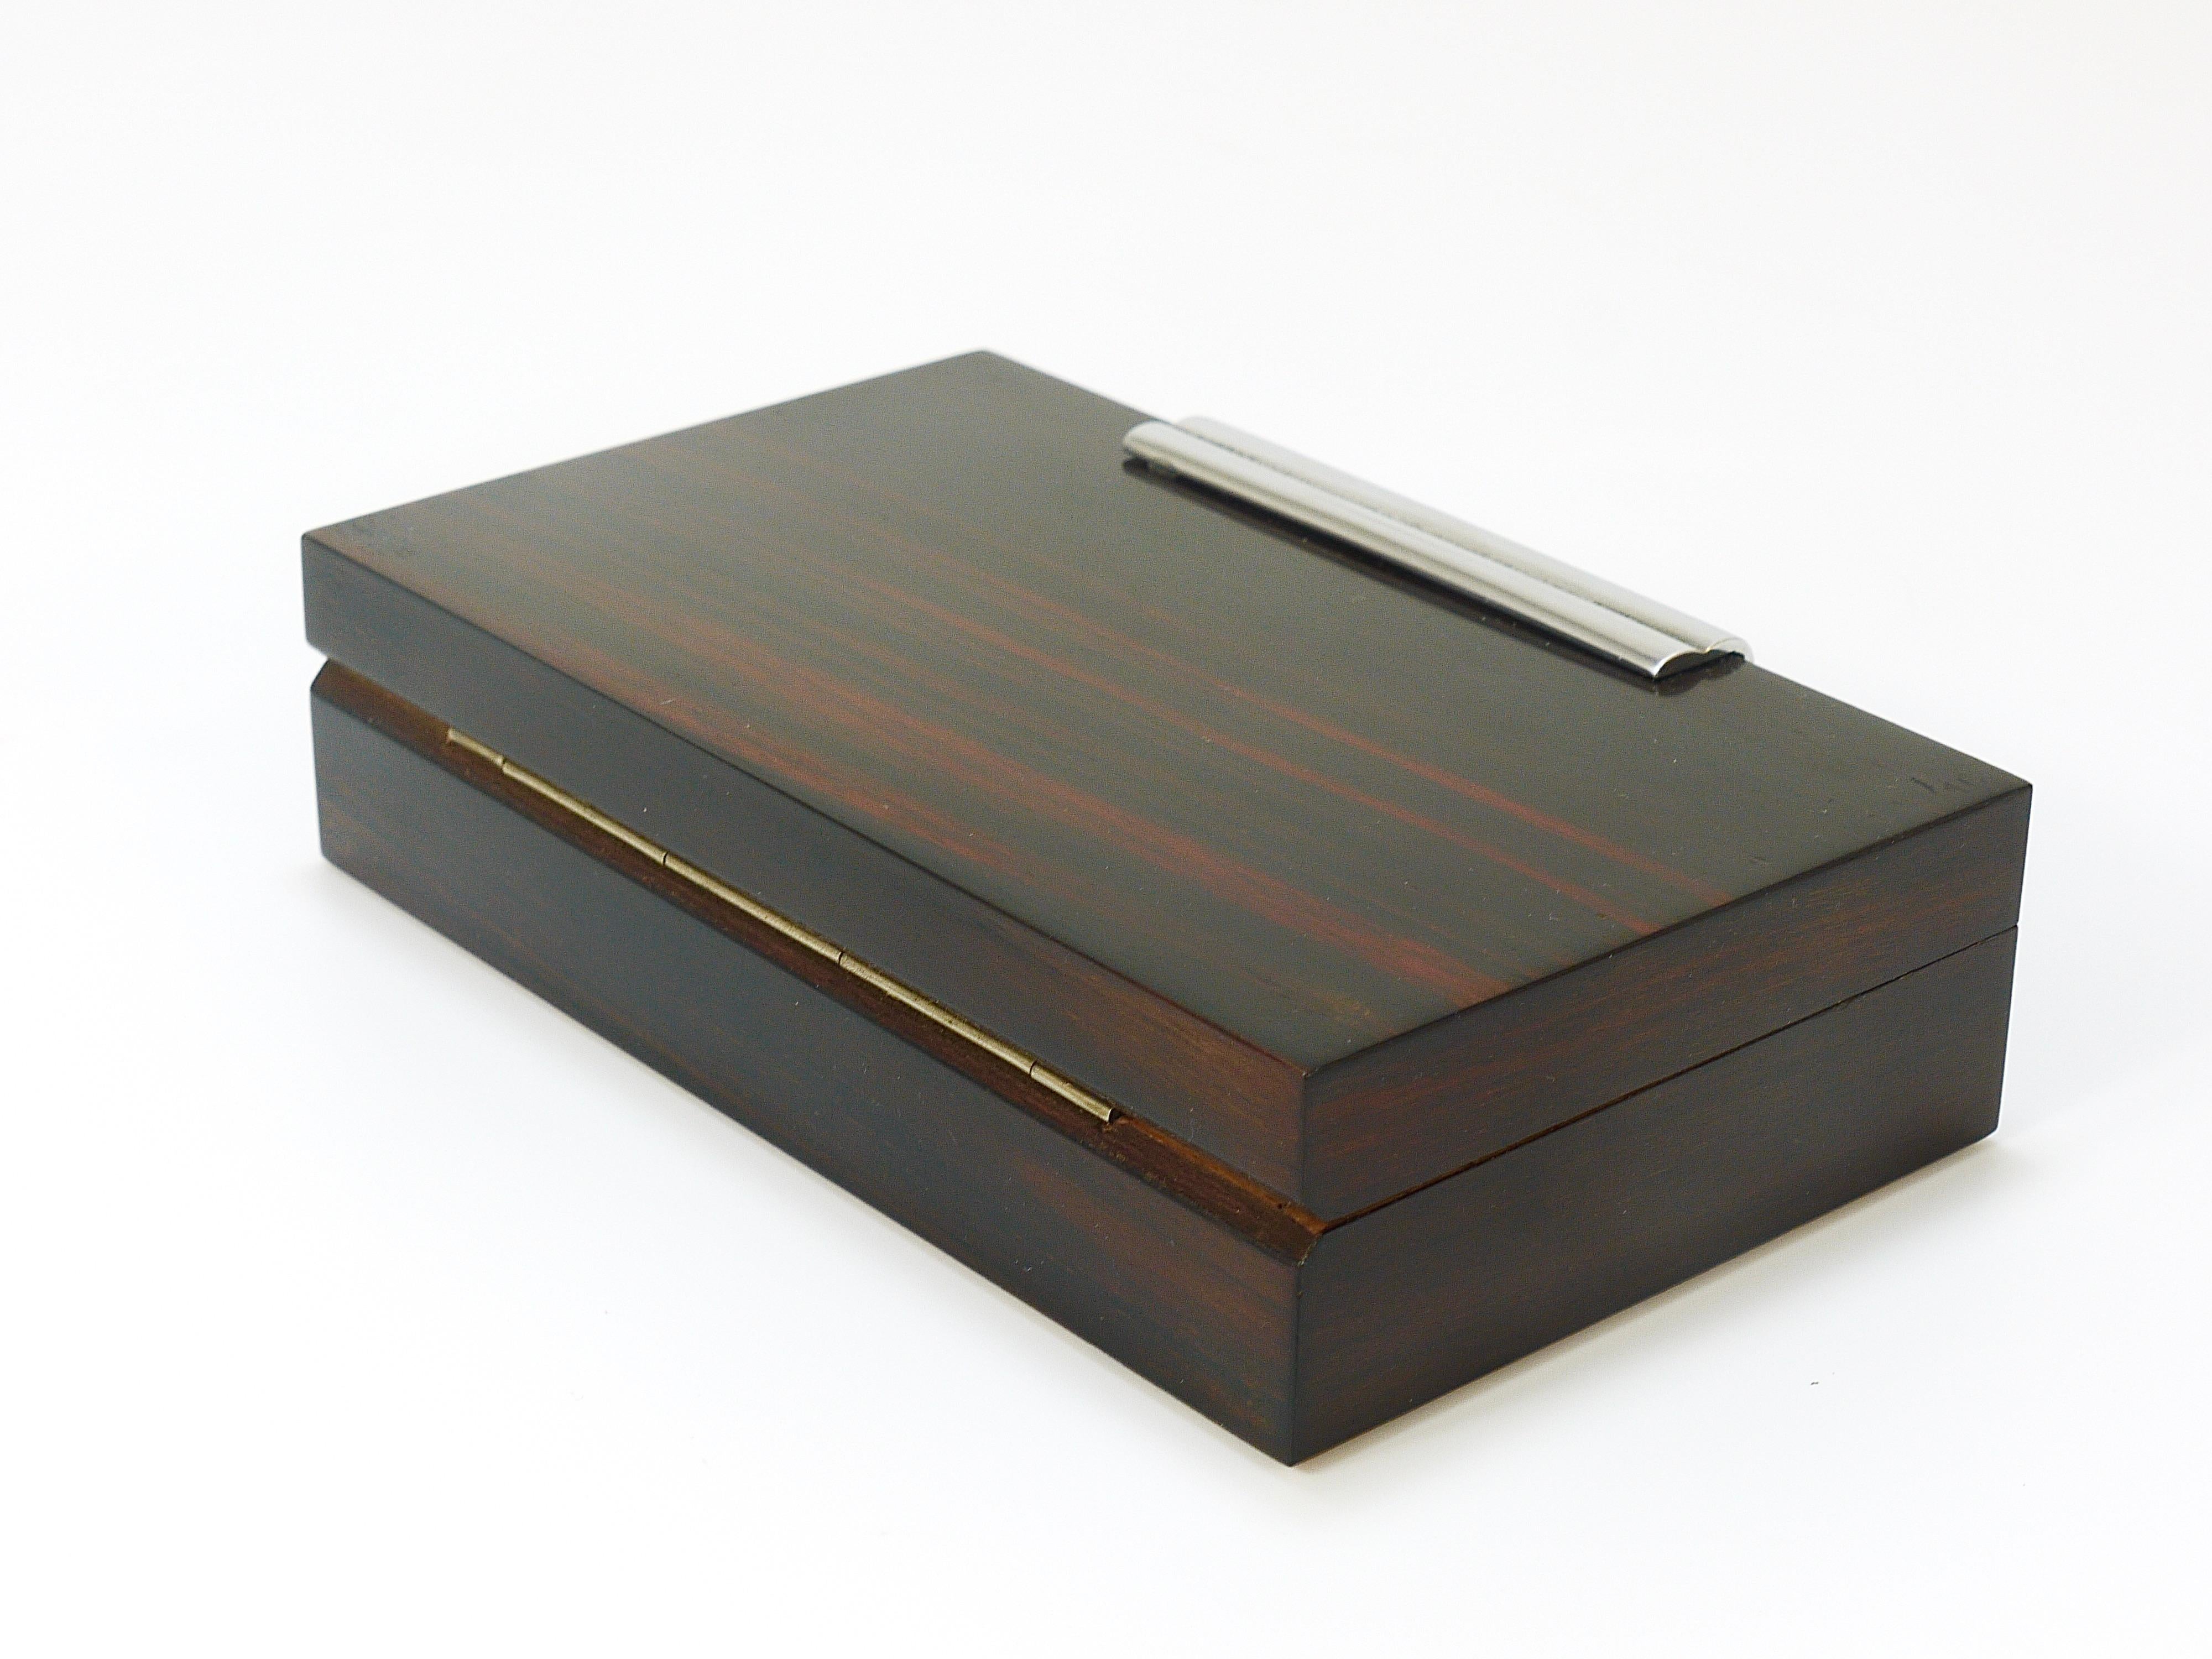 French Art Deco Rosewood & Nickel Storage Box, Maison Desny Style, France, 1930s For Sale 5